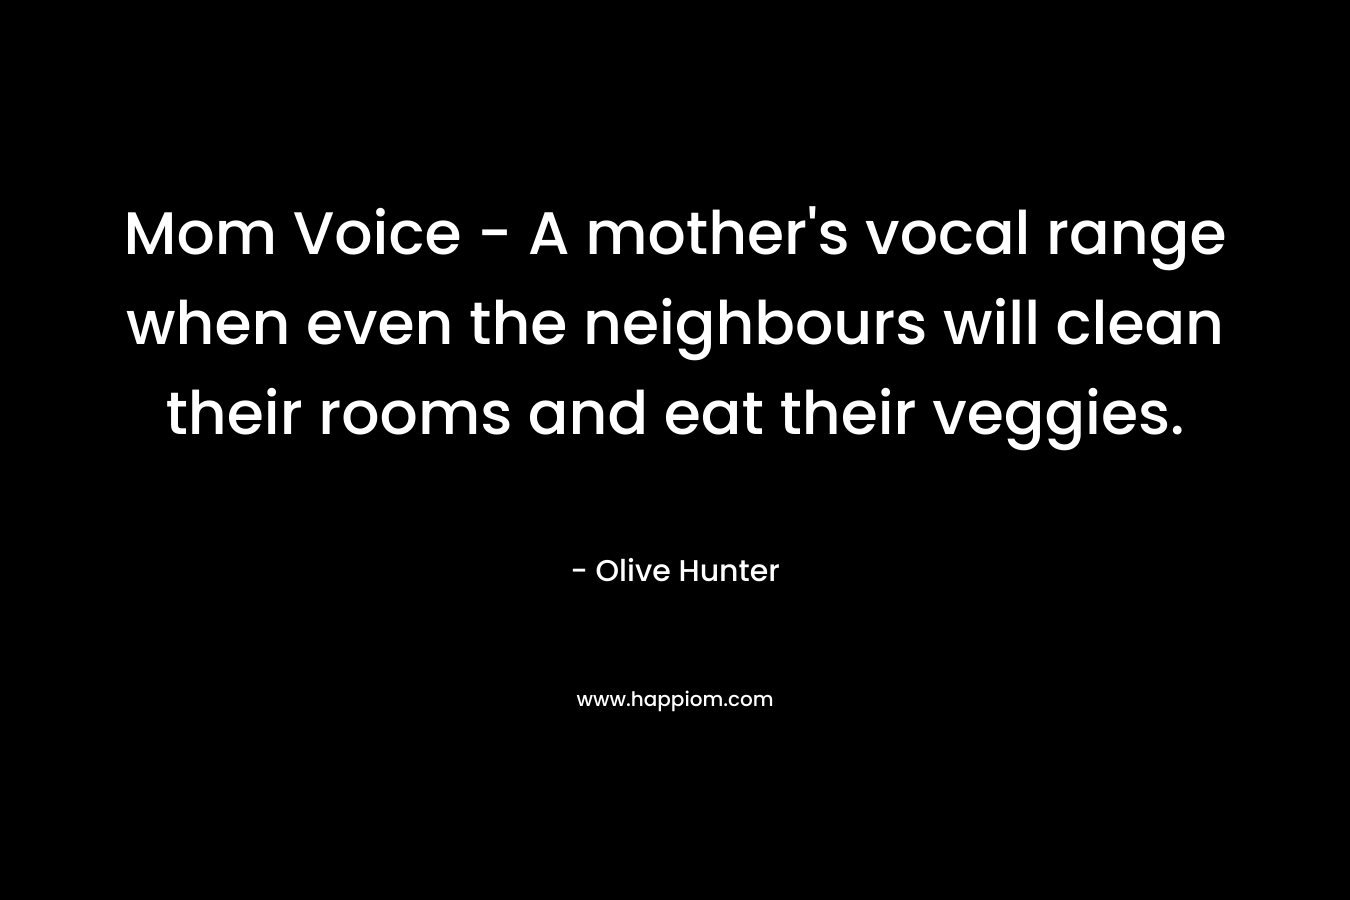 Mom Voice - A mother's vocal range when even the neighbours will clean their rooms and eat their veggies.